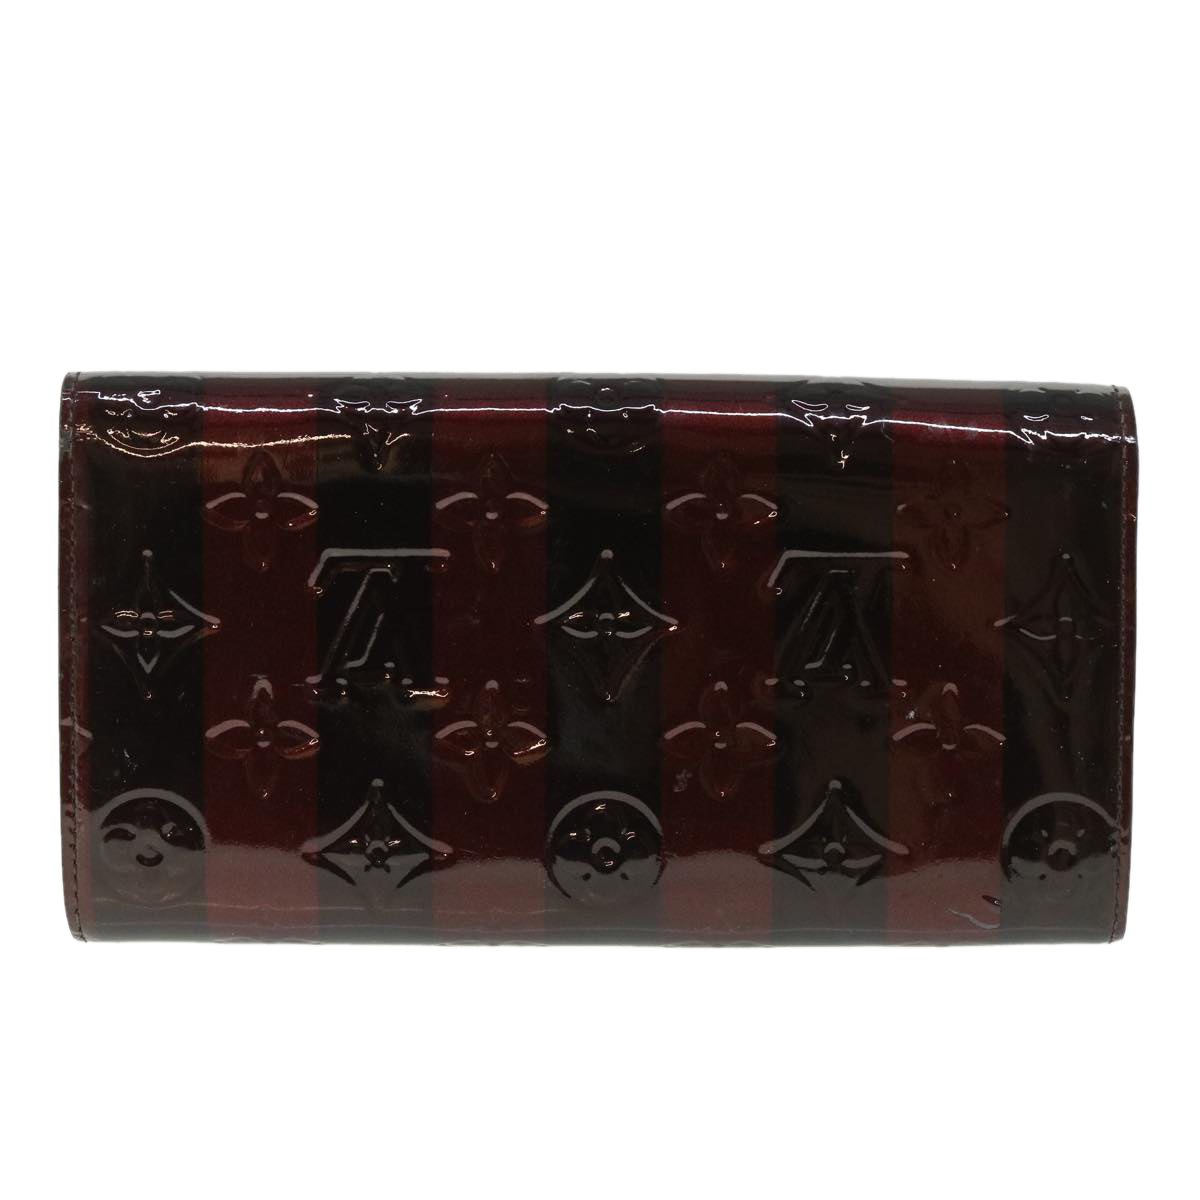 LOUIS VUITTON Vernis Rayure Portefeiulle Sarah Wallet Red M91716 LV Auth 55262